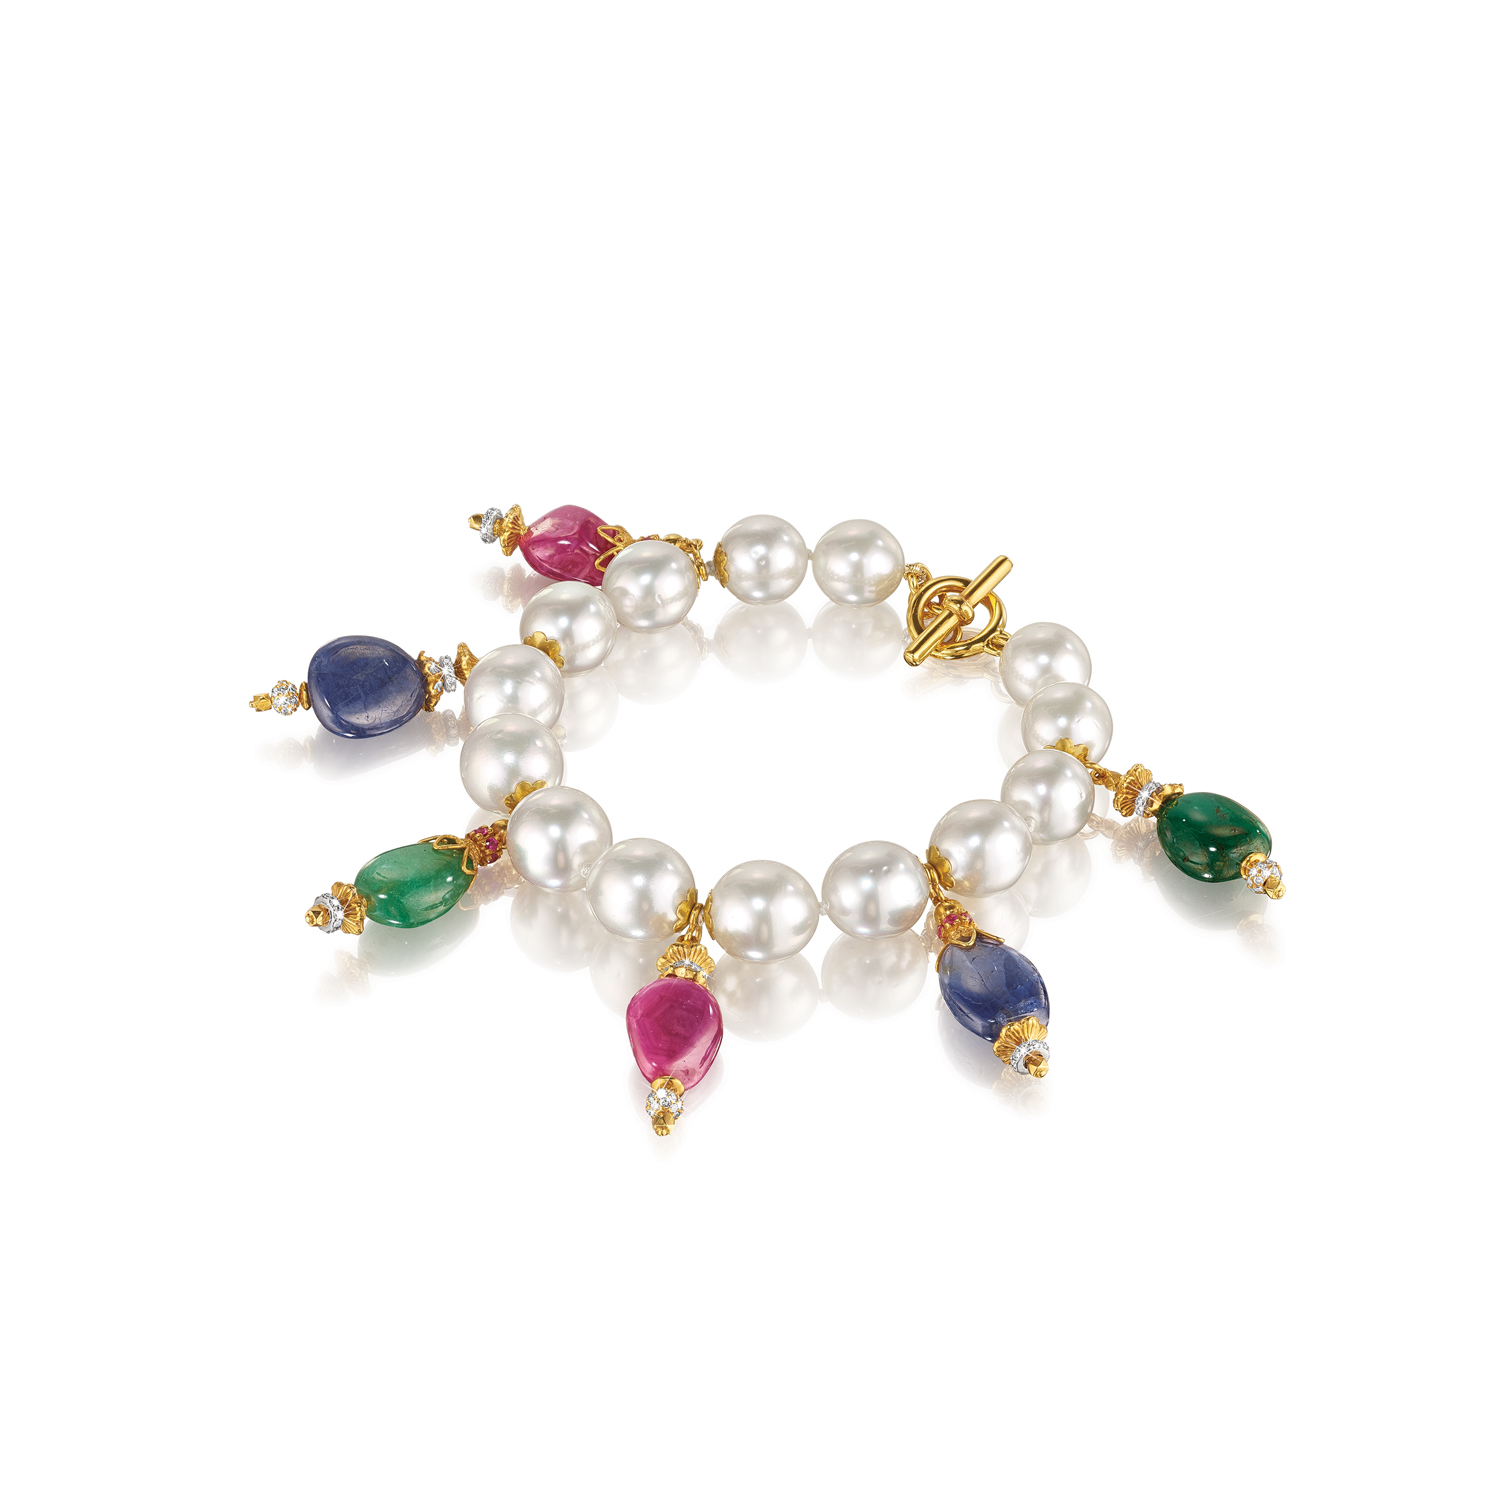 Inspired by the richly hued mosaics and gold-encrusted treasures of the Byzantine Empire, Verdura set gems into gold like tiles, mixing precious and semi-precious stones in various colors and cuts. South Sea cultured pearl, sapphire, emerald, ruby, diamond, gold and sterling silver